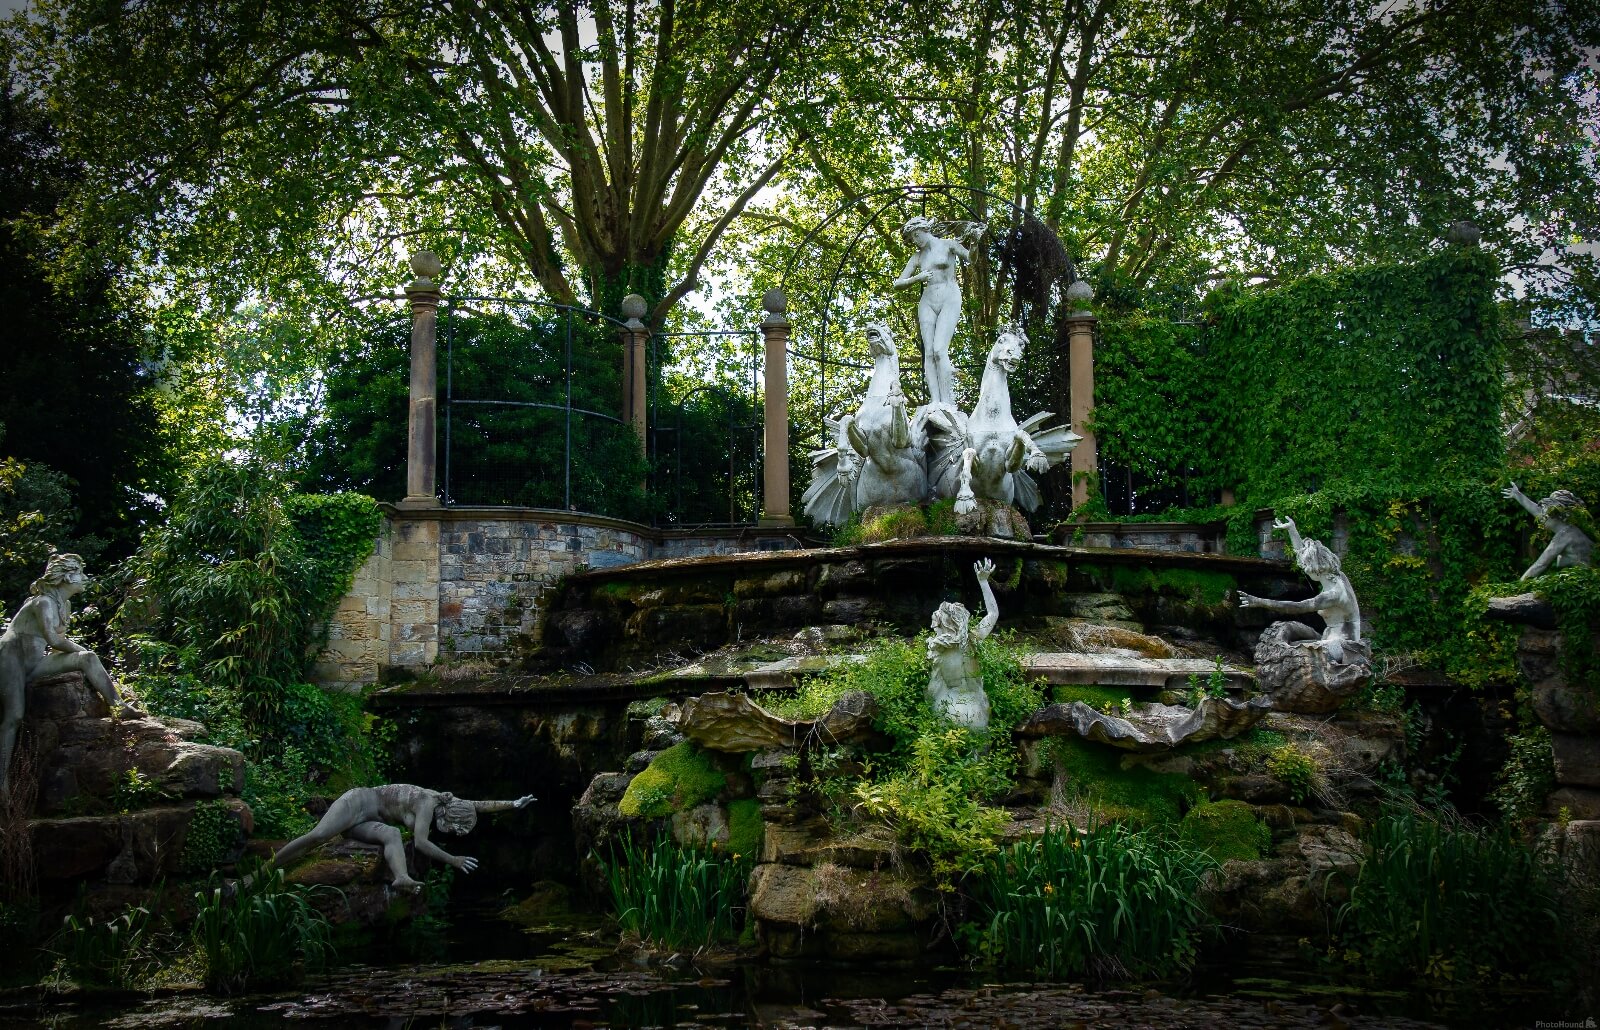 Image of The Naked Ladies, York House Gardens by Jules Renahan